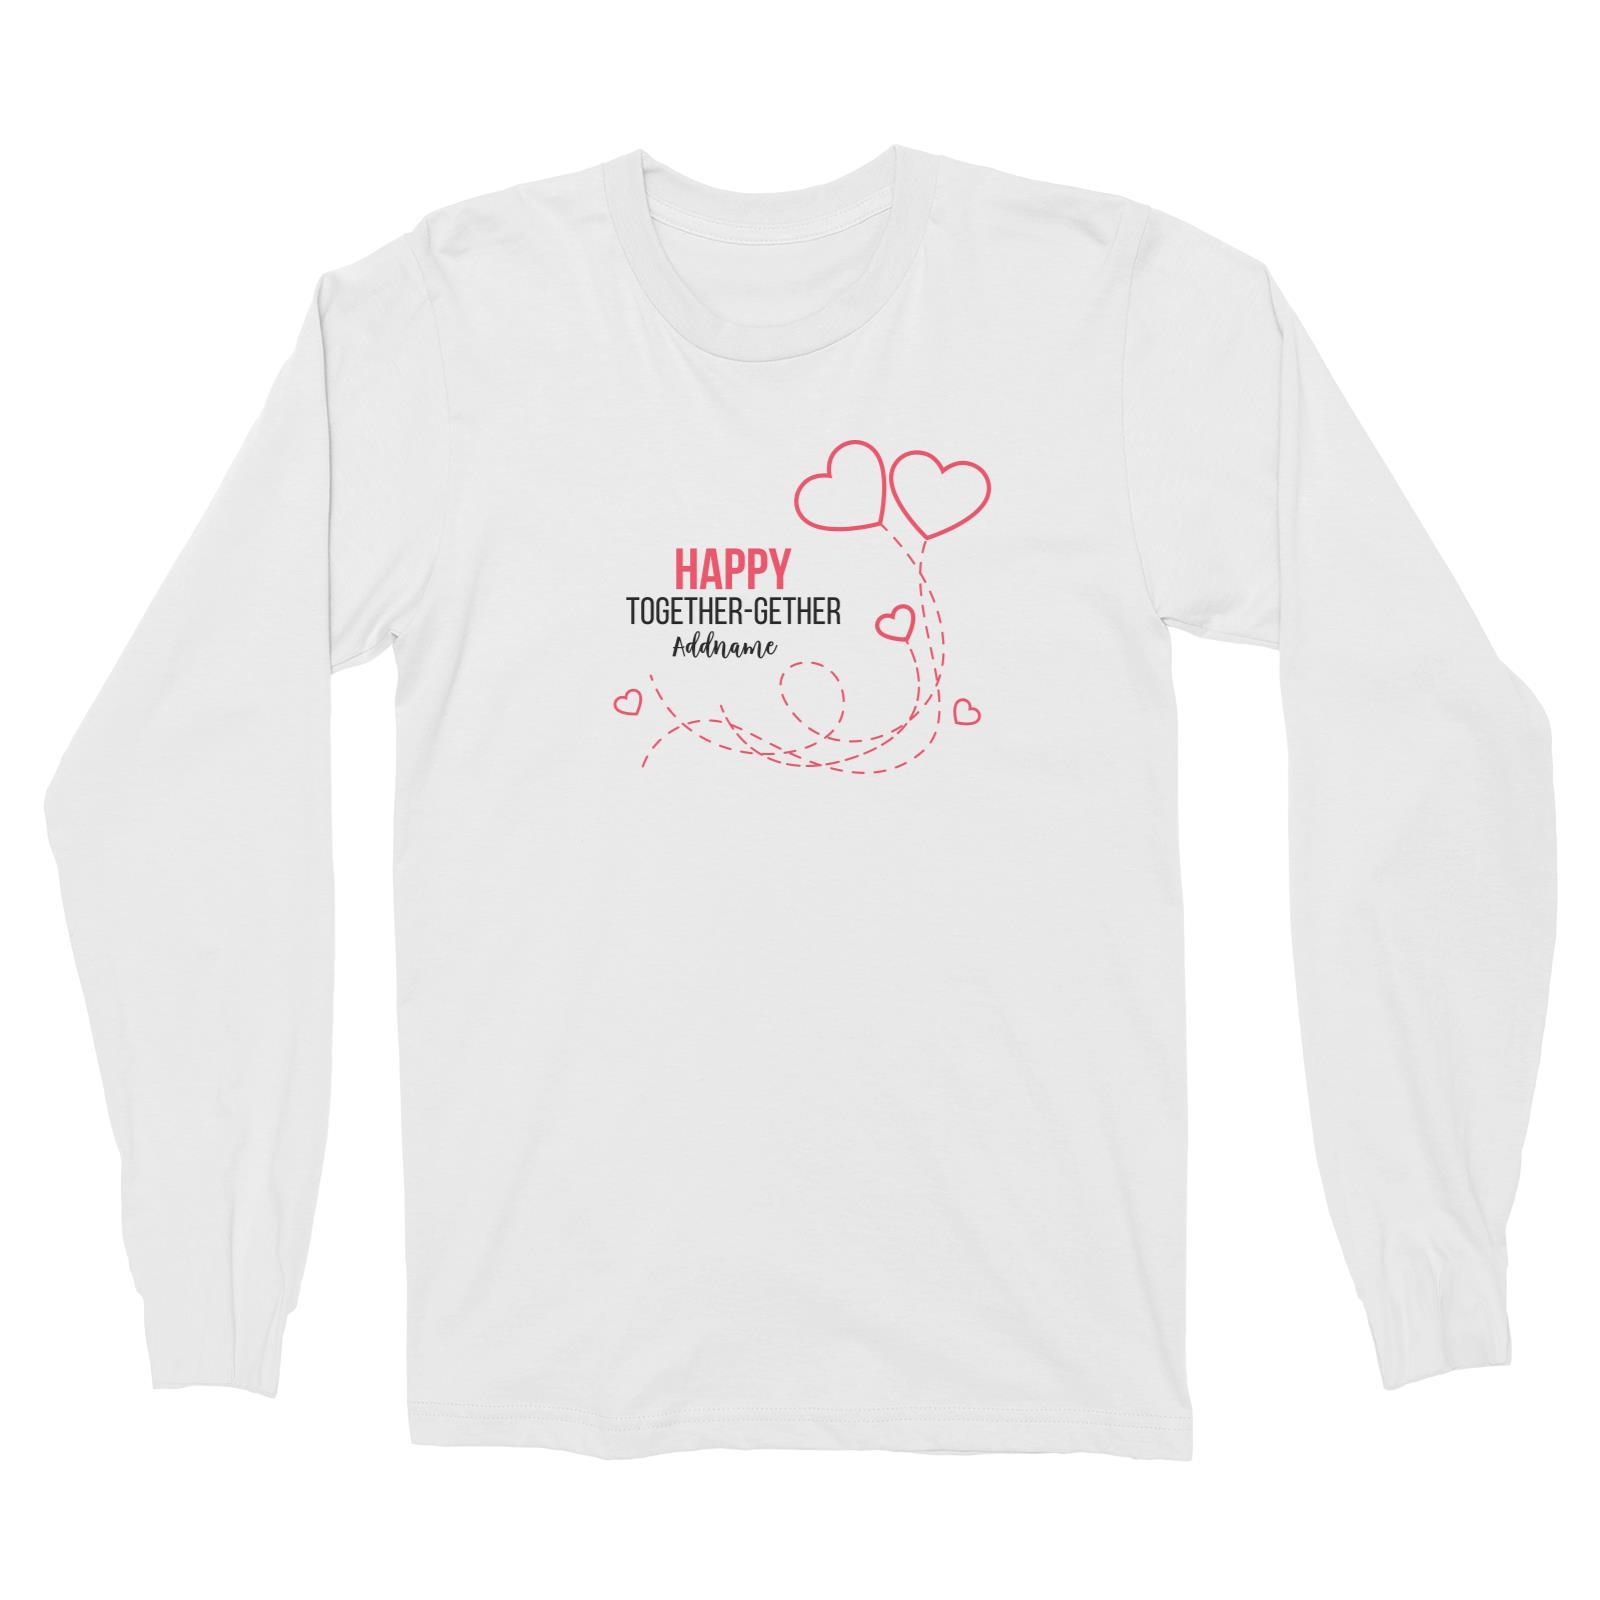 Happy Together Gether with Hearts Long Sleeve Unisex T-Shirt